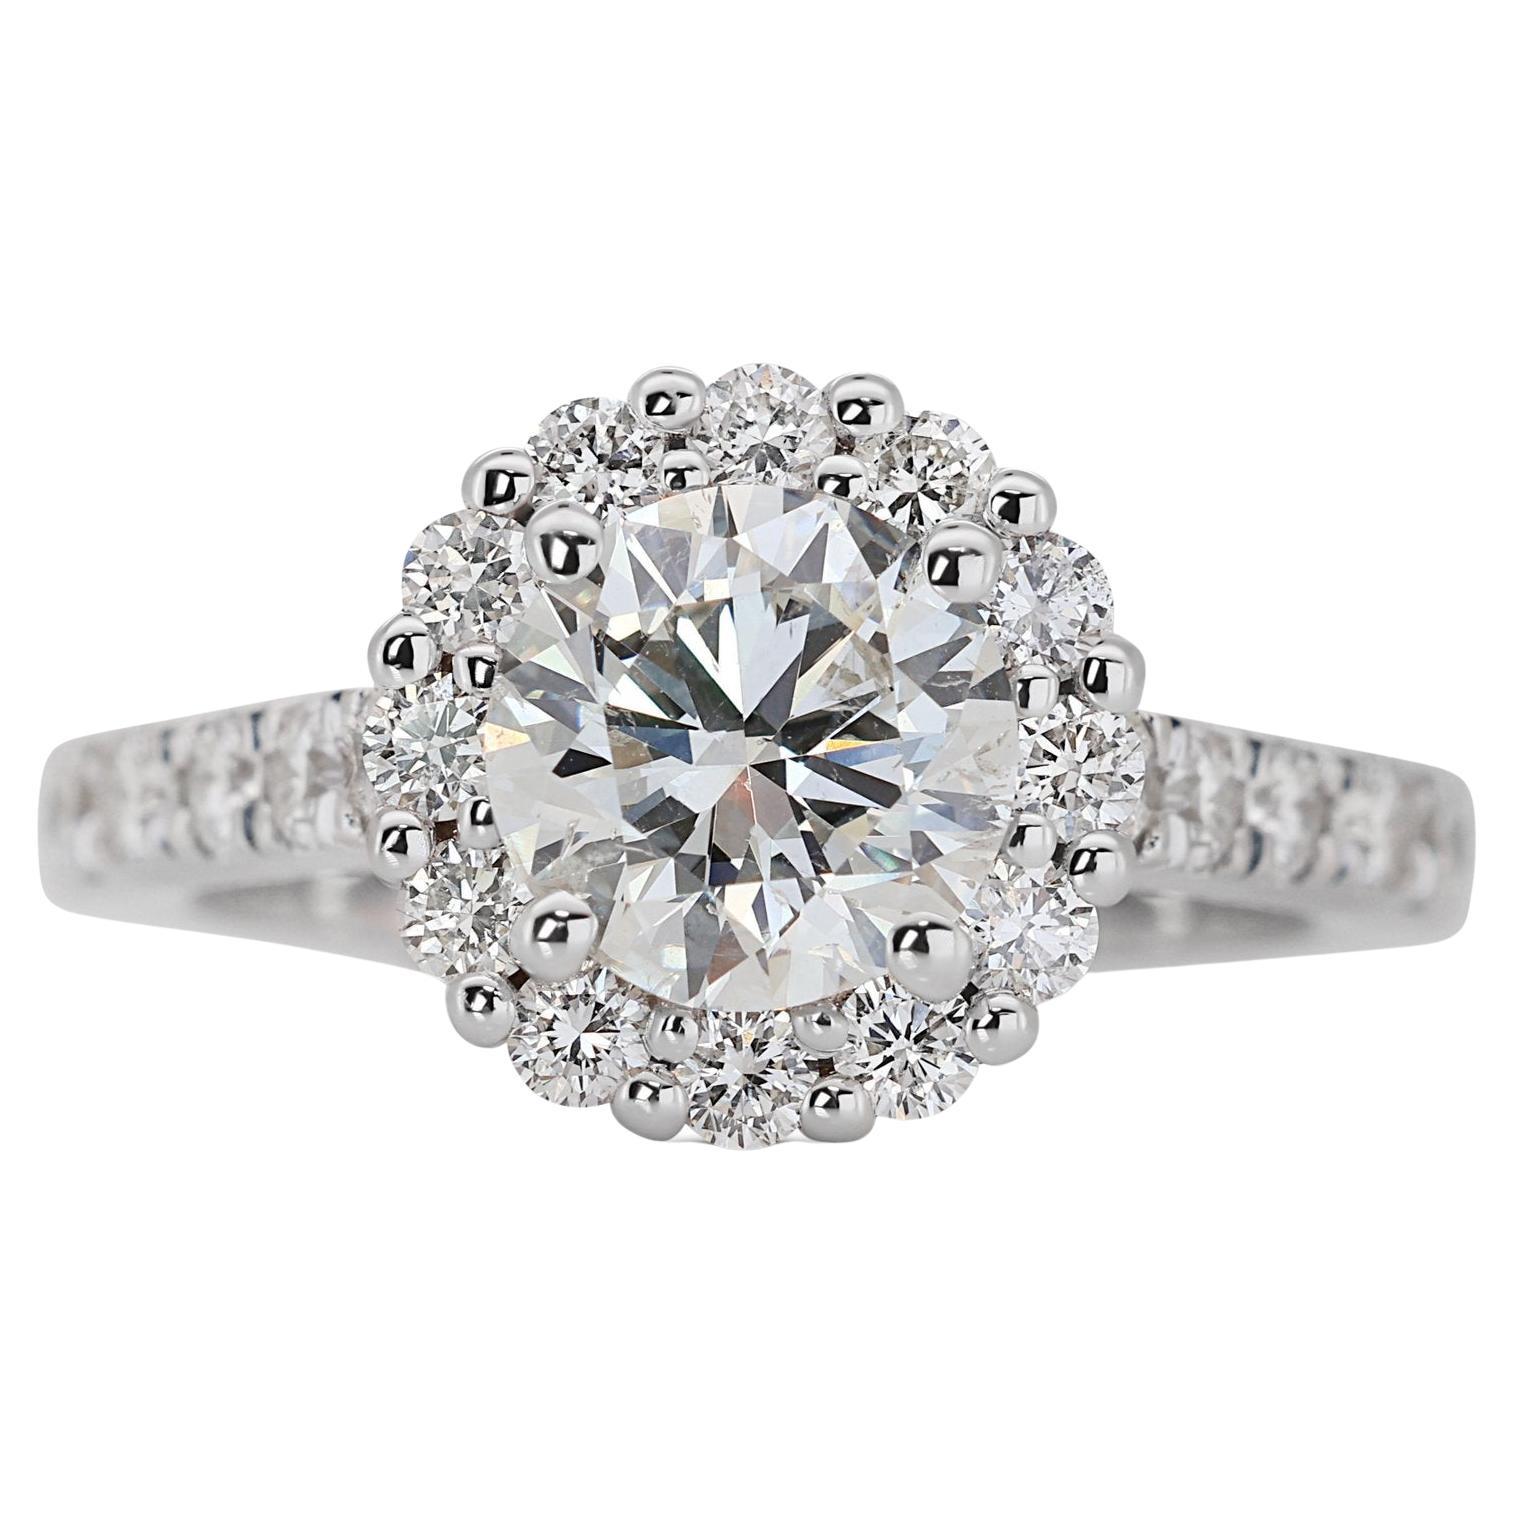 Luxurious 1.72ct Diamond Halo Ring in 18k White Gold - GIA Certified For Sale